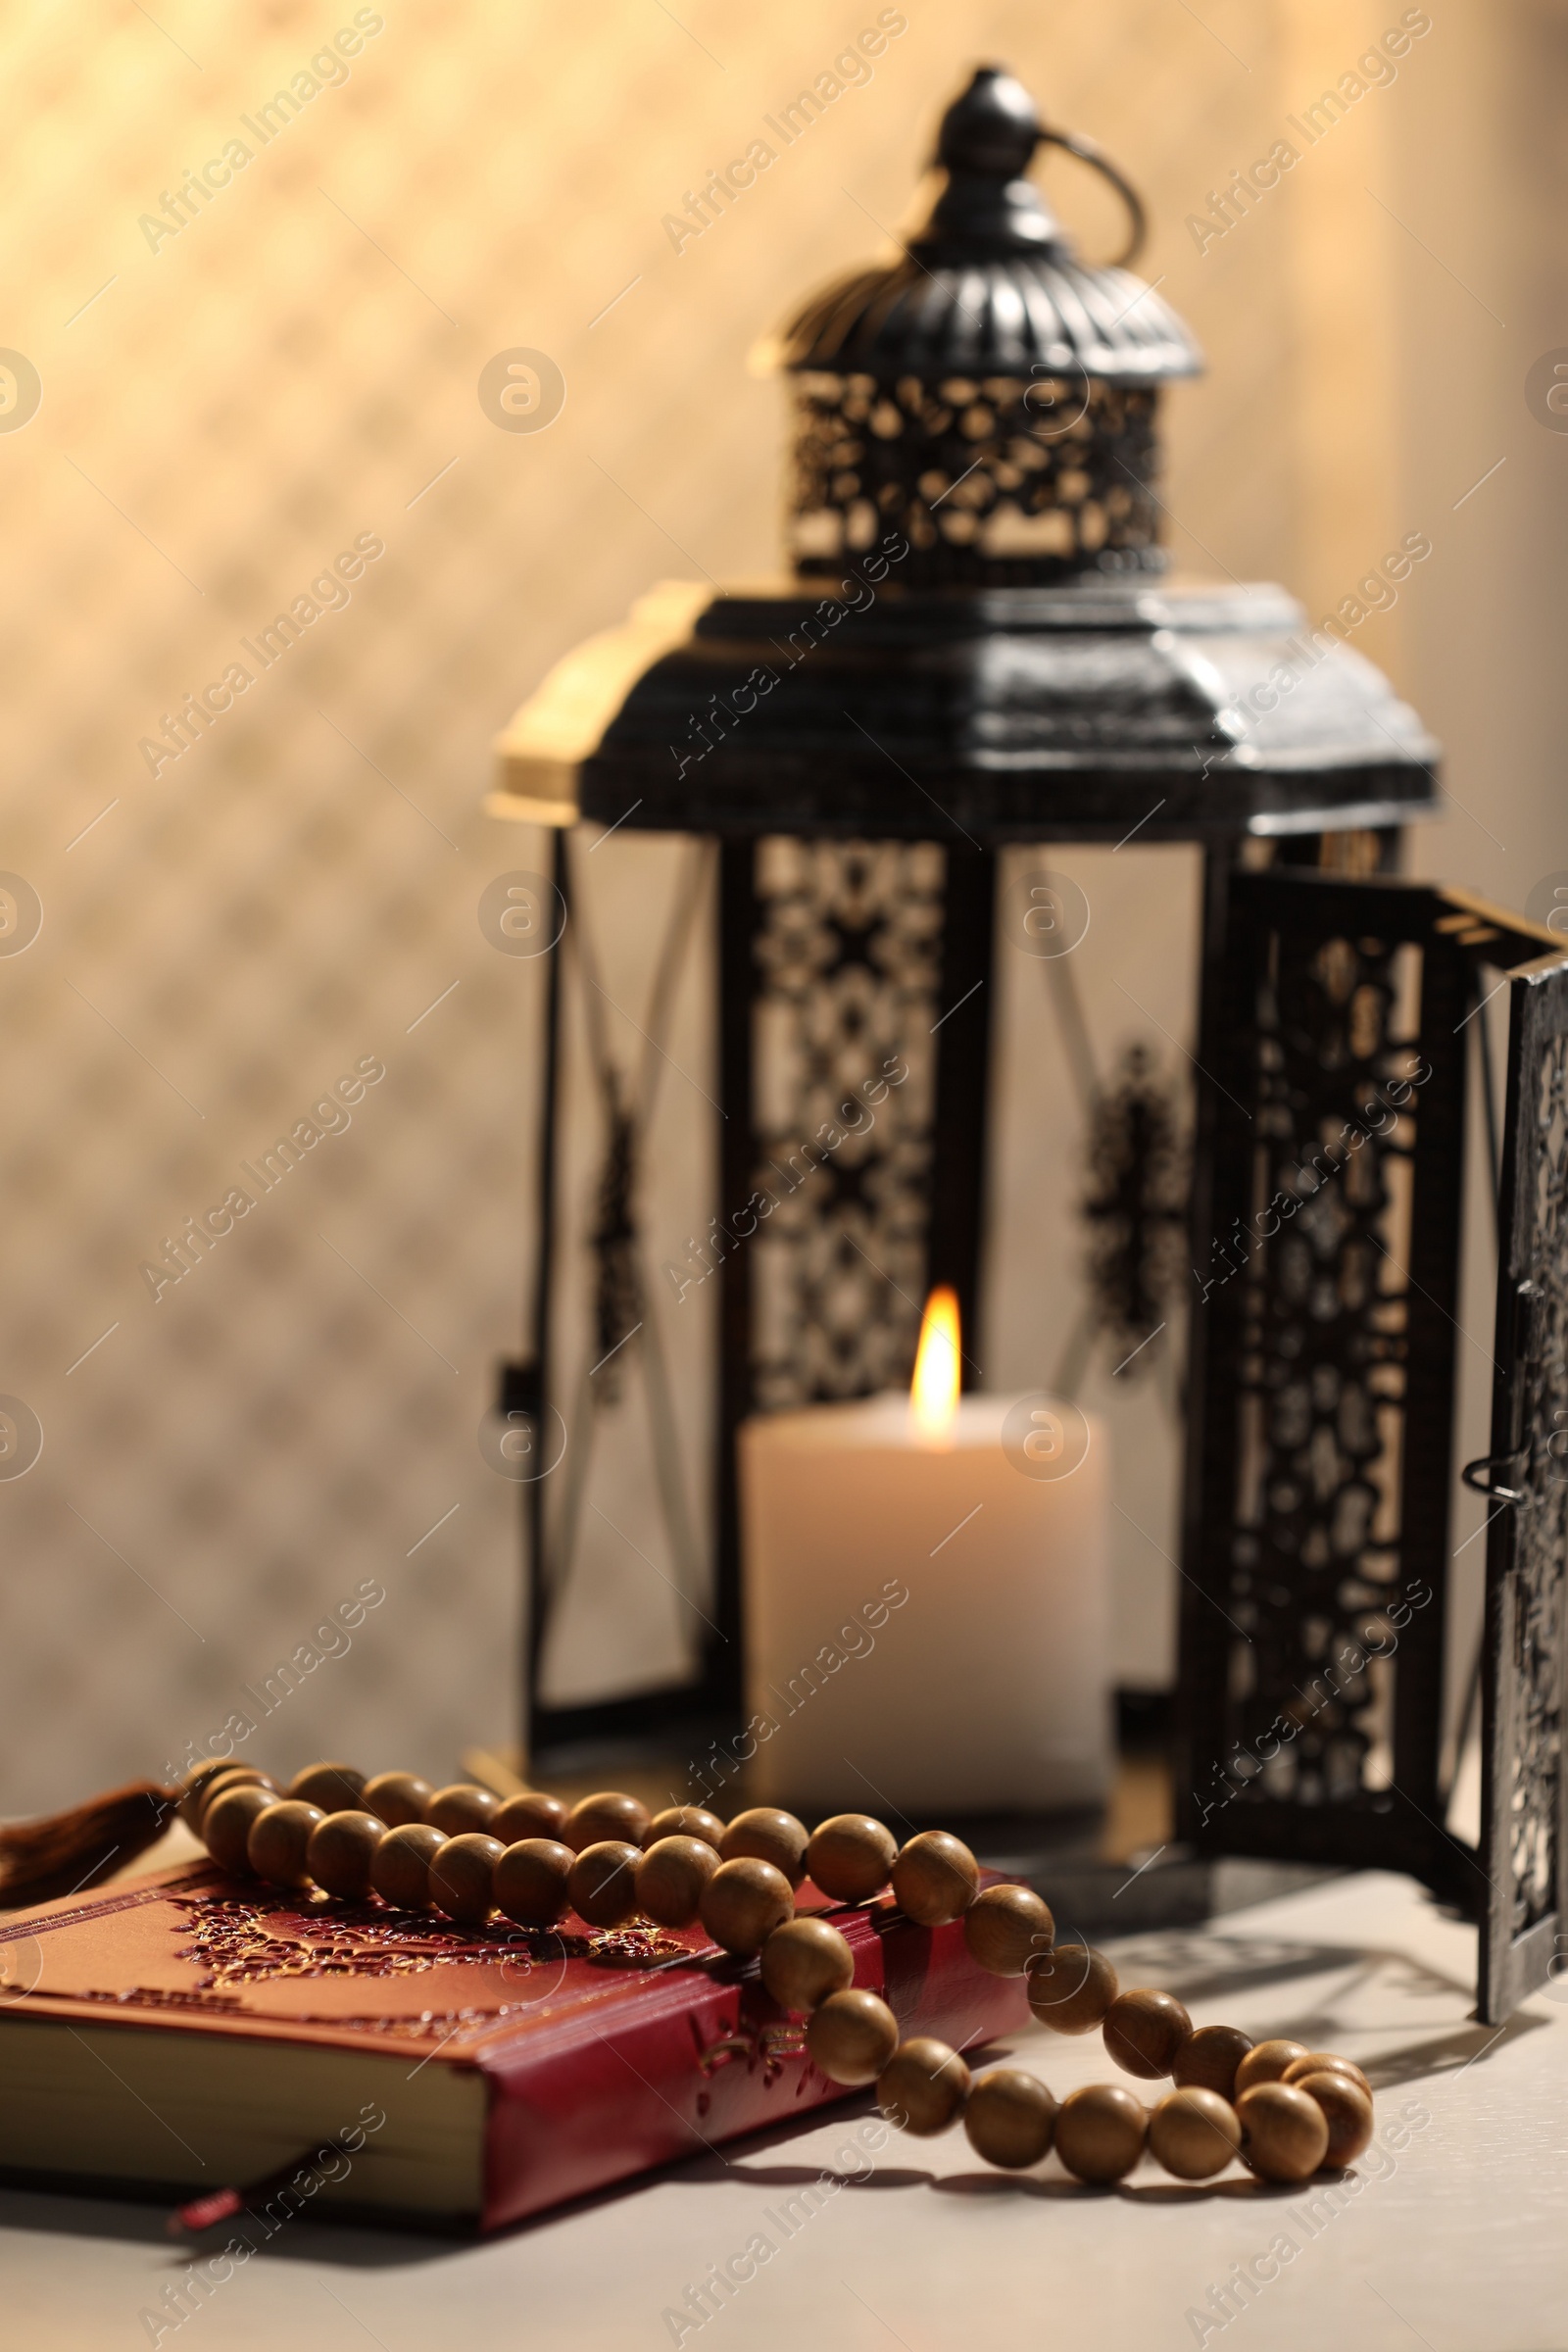 Photo of Arabic lantern, Quran and misbaha on white table